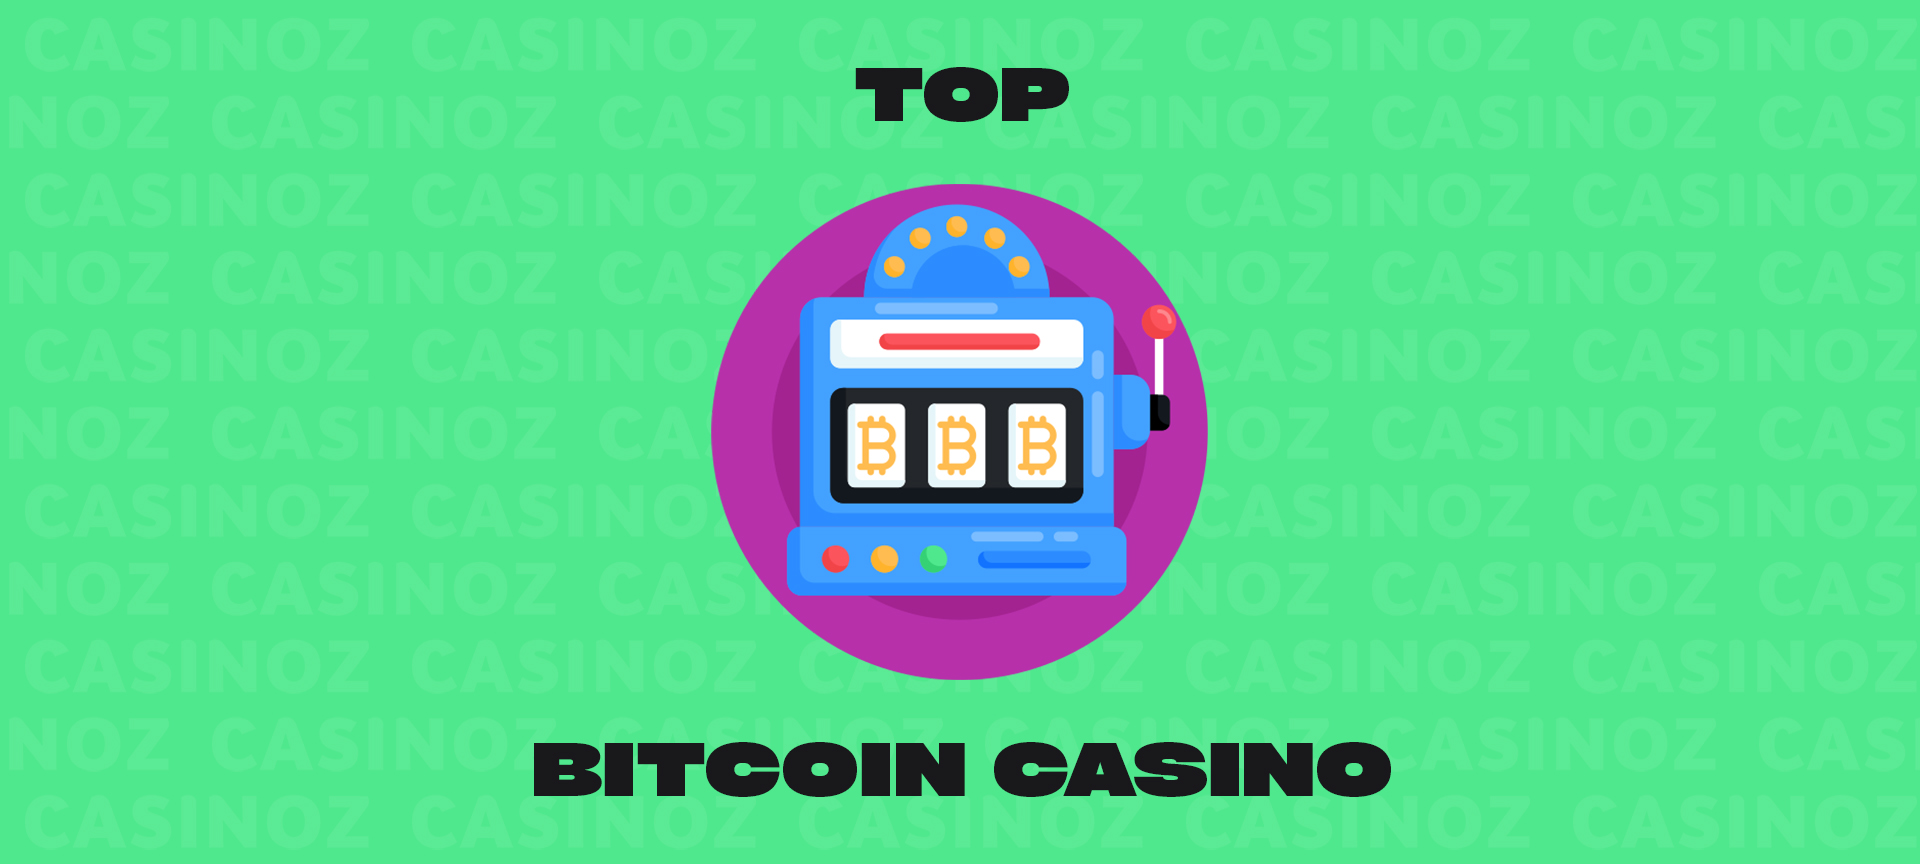 3 Kinds Of Casino Cryptocurrency: Which One Will Make The Most Money?